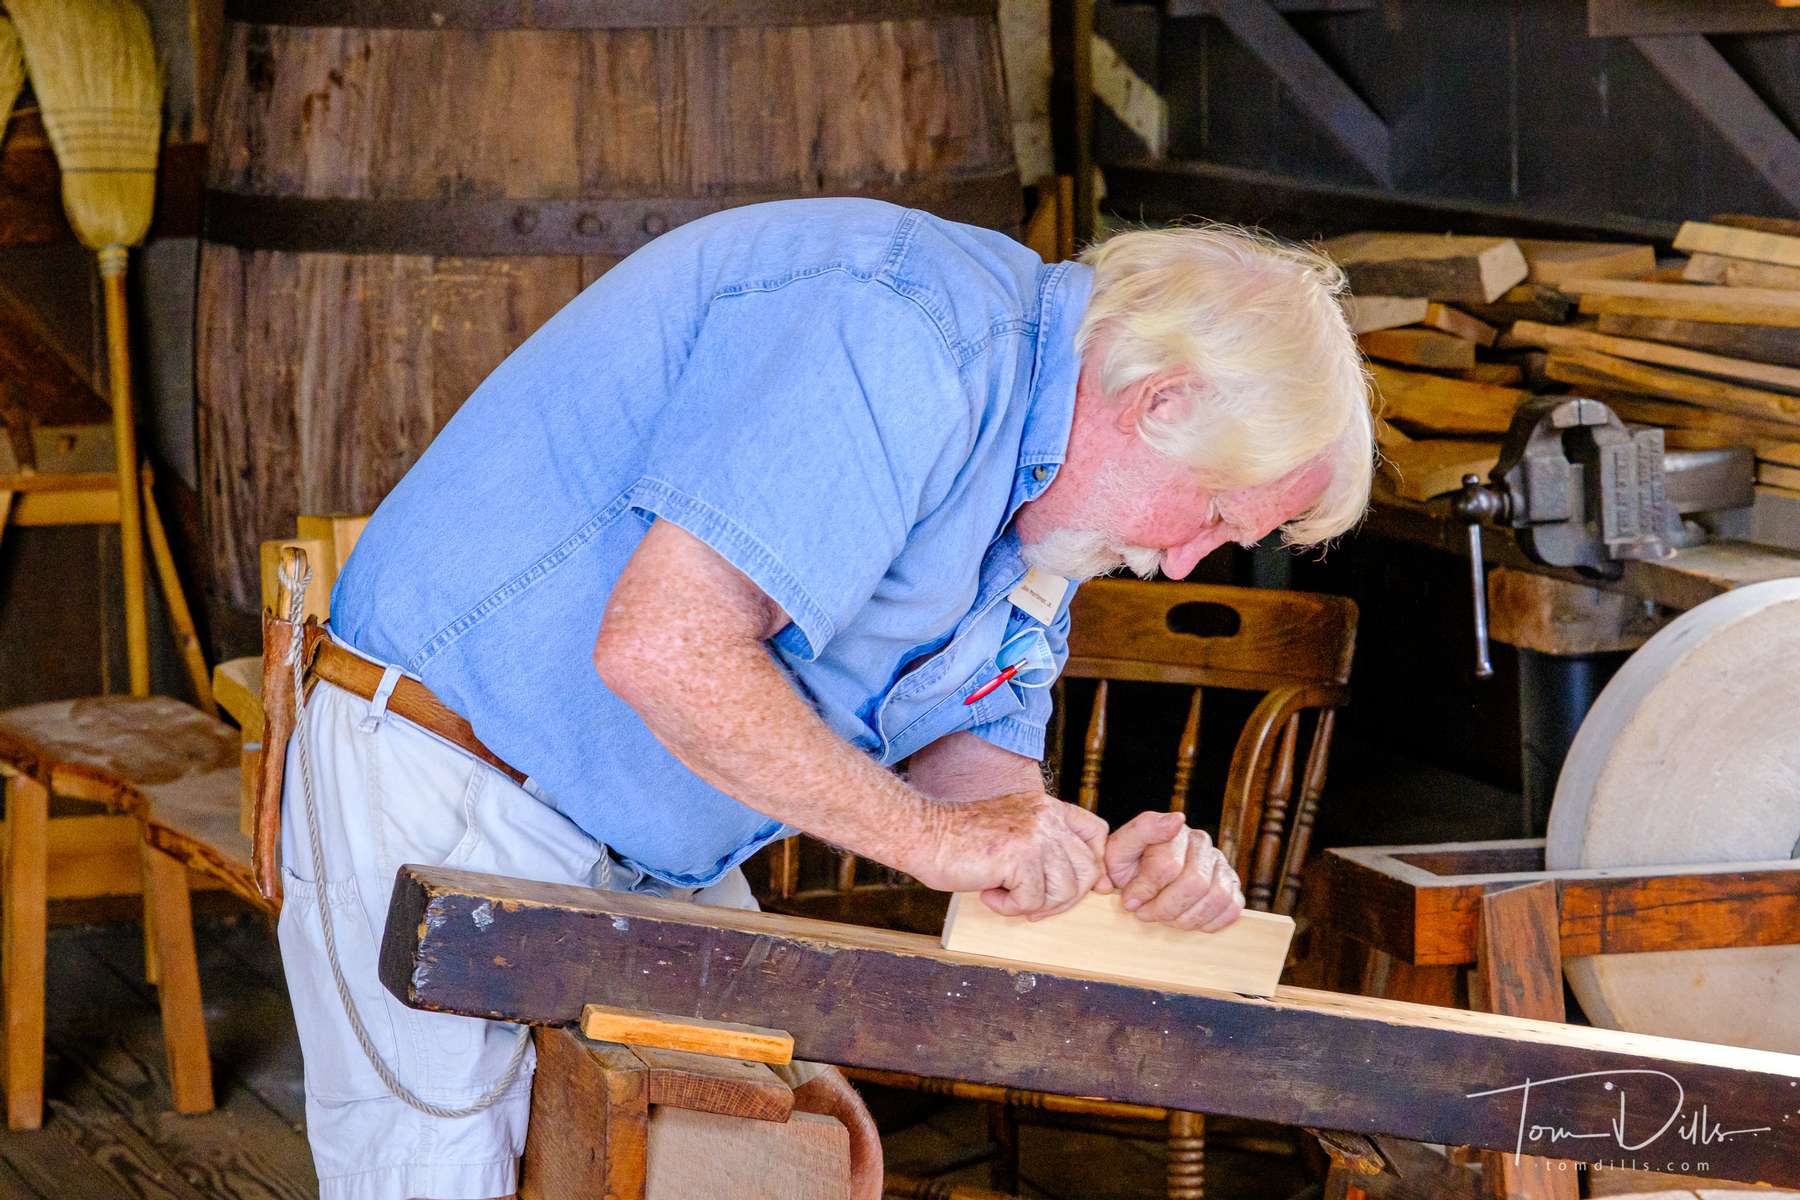 Barrel making demonstration at the Cooper's Shop at Mystic Seaport Museum in Mystic, Connecticut